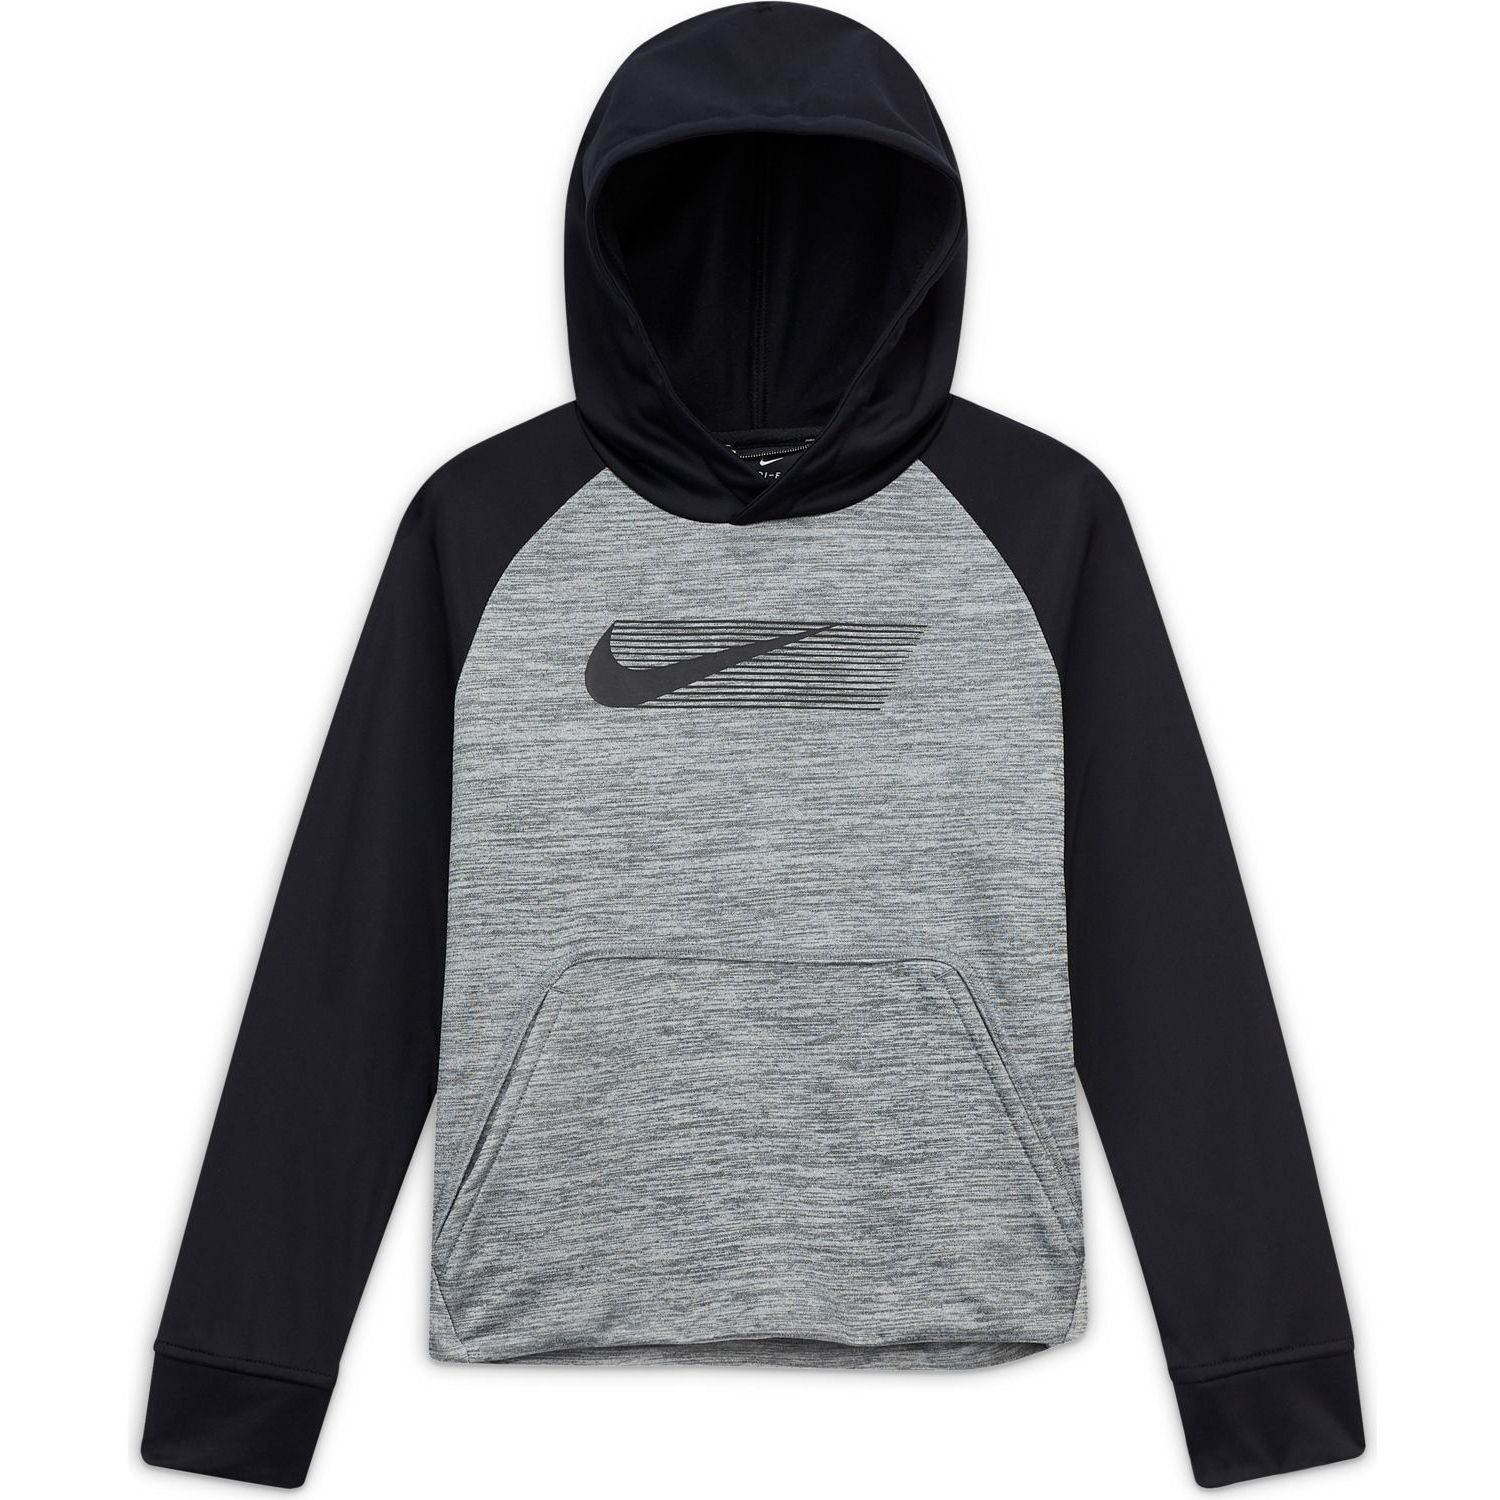 does kohls sell nike clothes